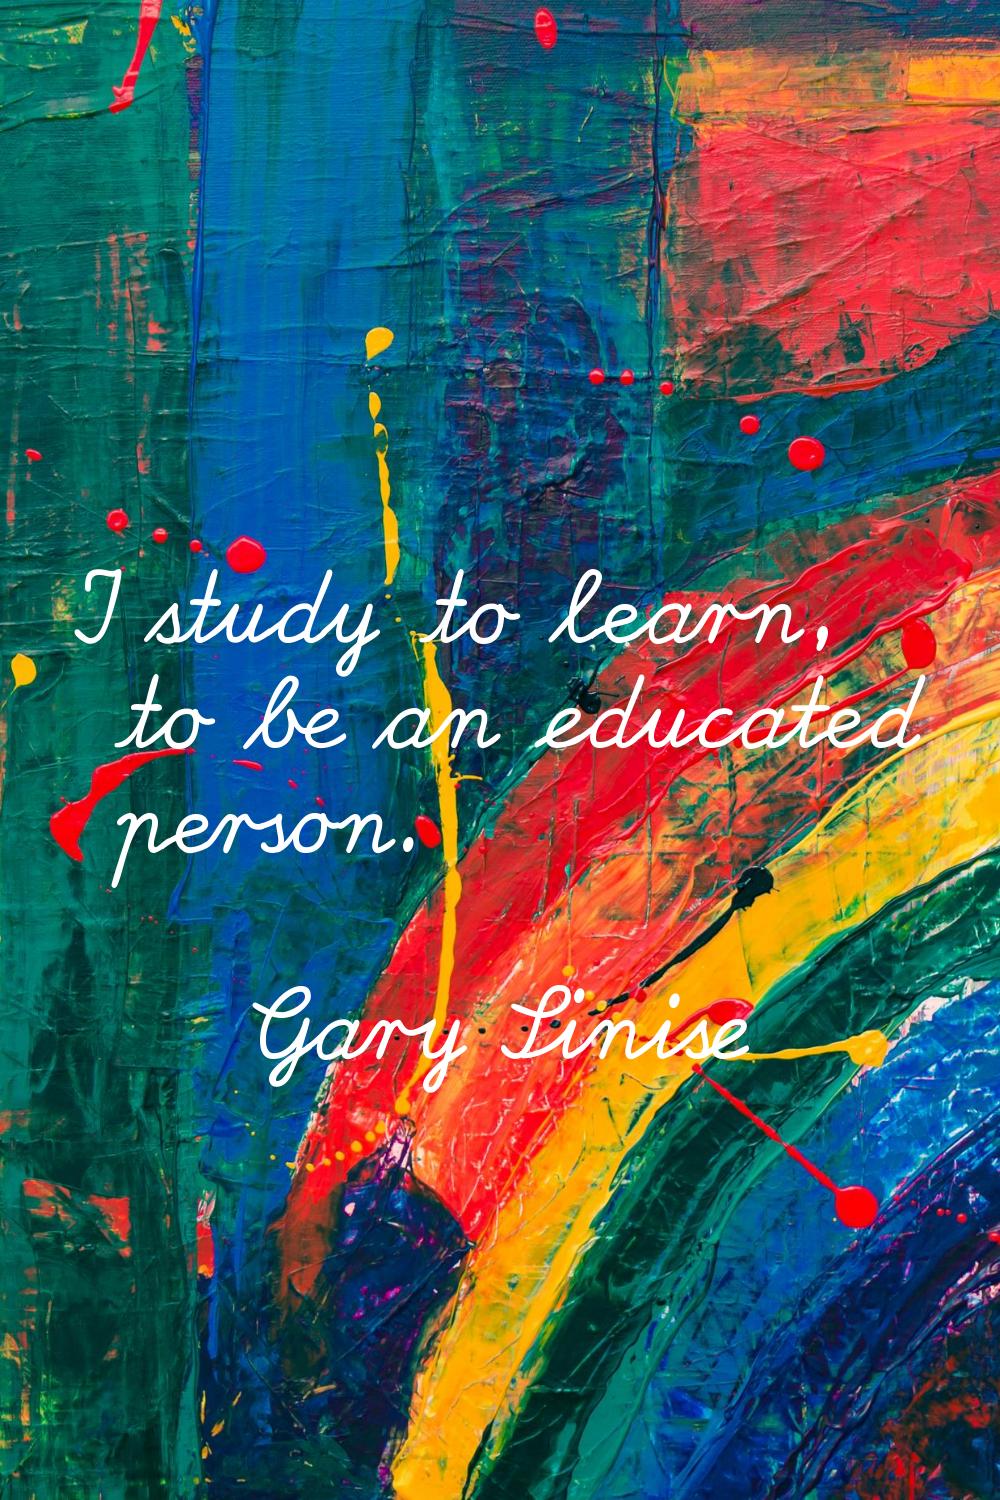 I study to learn, to be an educated person.